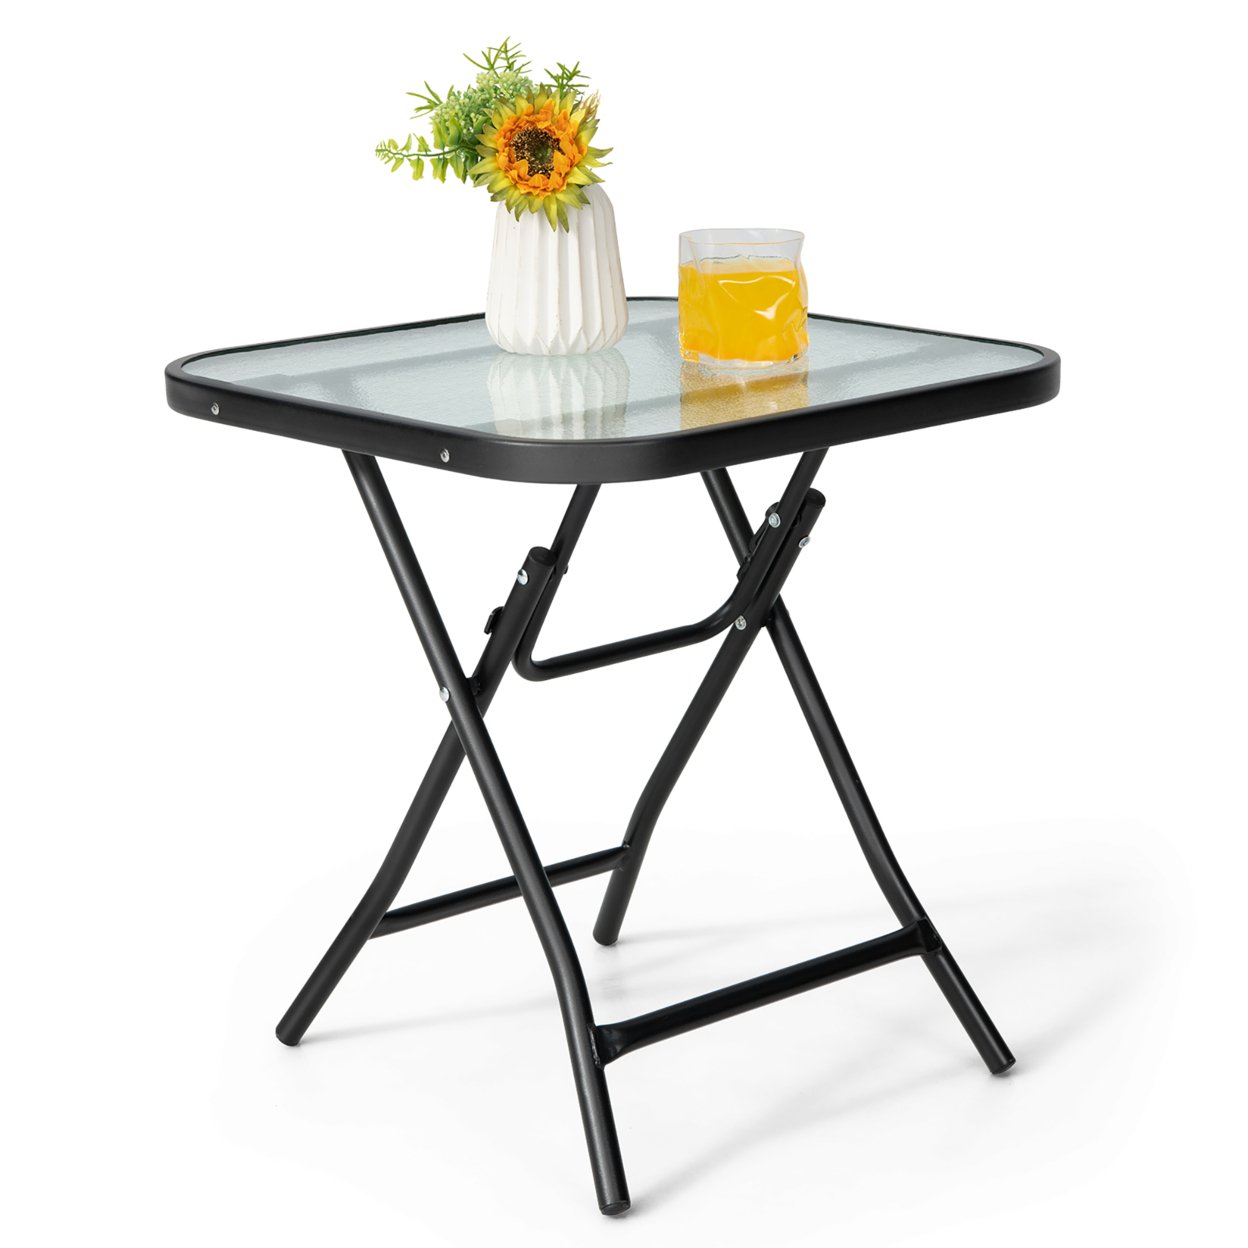 18'' Foldable Patio Side Table Square Coffee Bistro Table W/ Tempered Glass Table Top